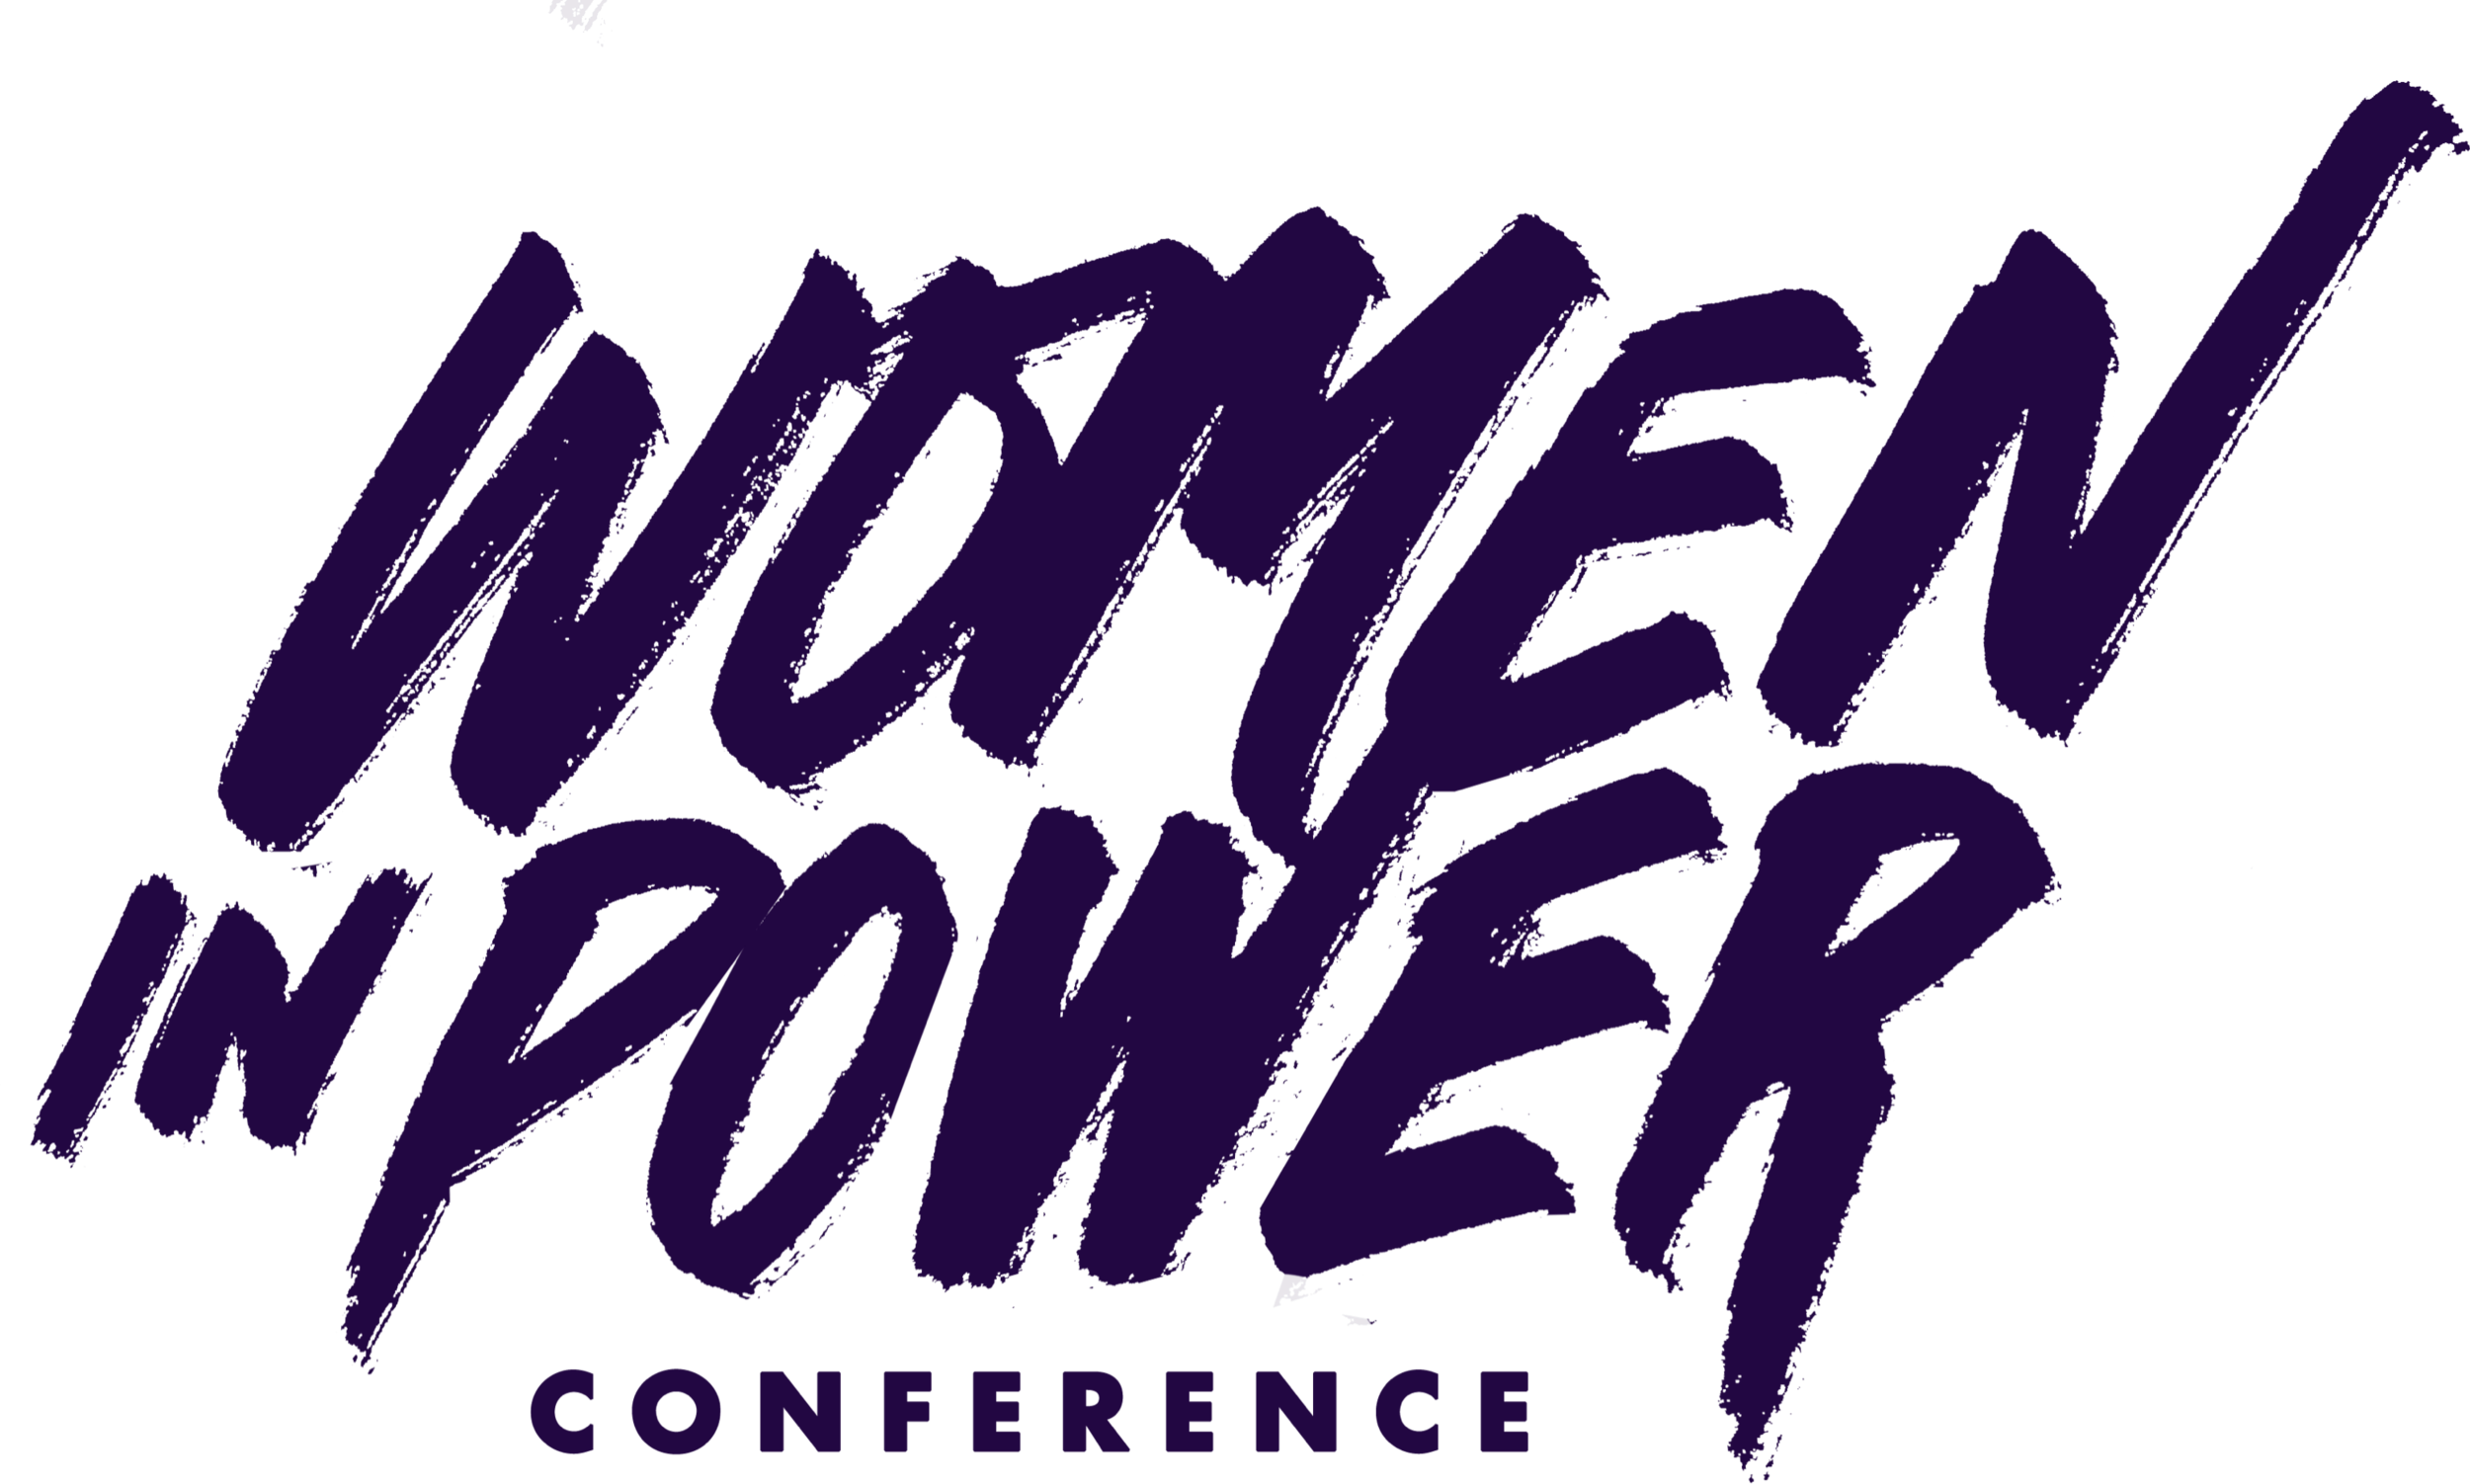 Women in Power Conference